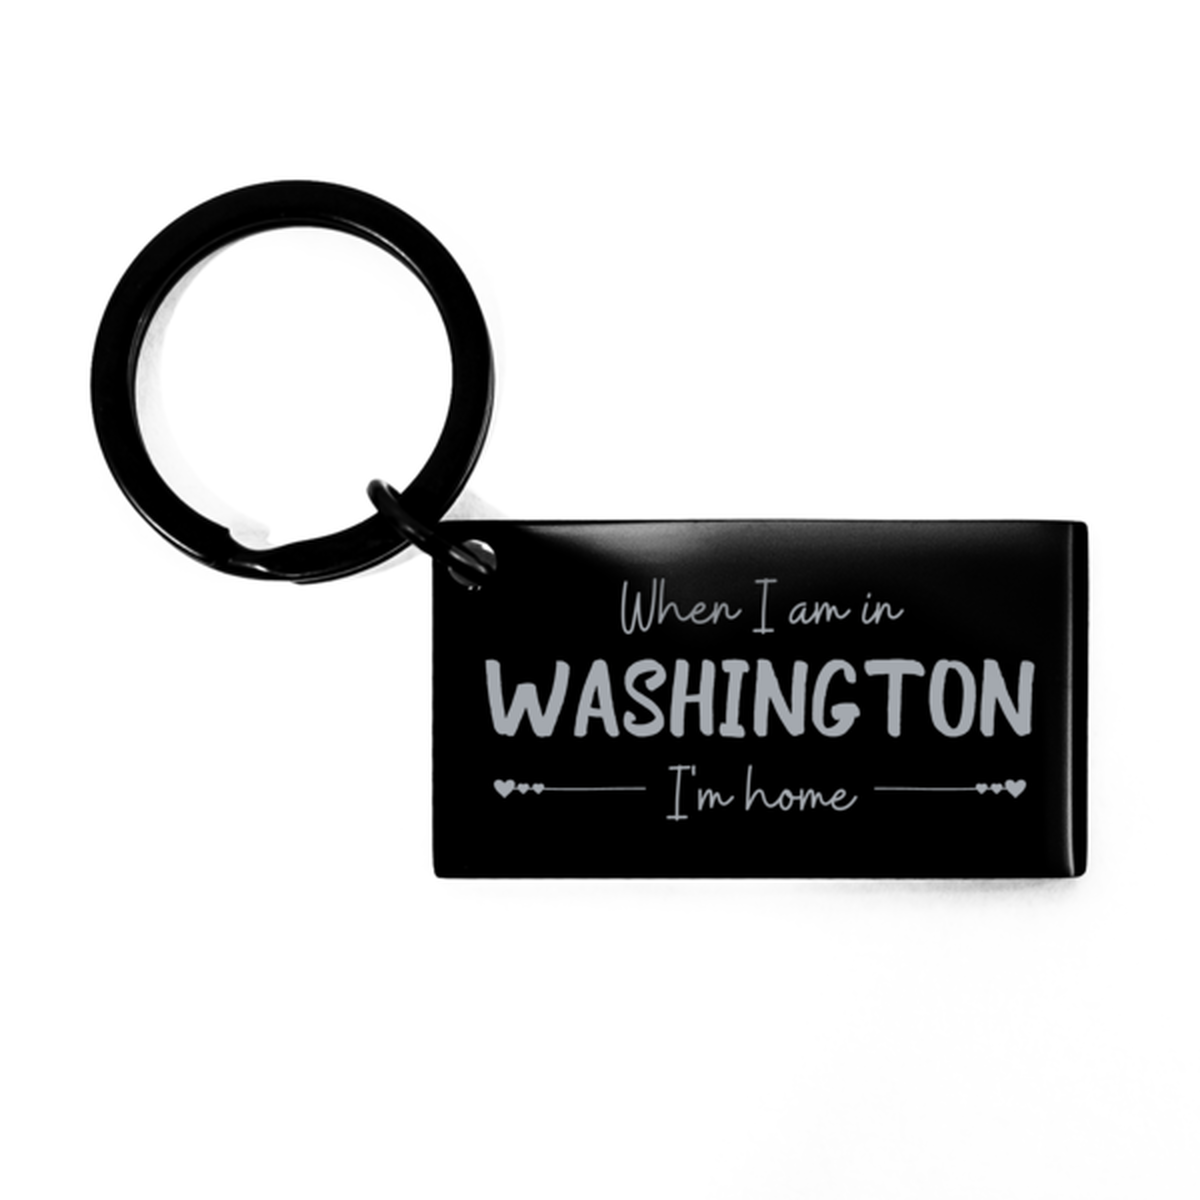 When I am in Washington I'm home Keychain, Cheap Gifts For Washington, State Washington Birthday Gifts for Friends Coworker